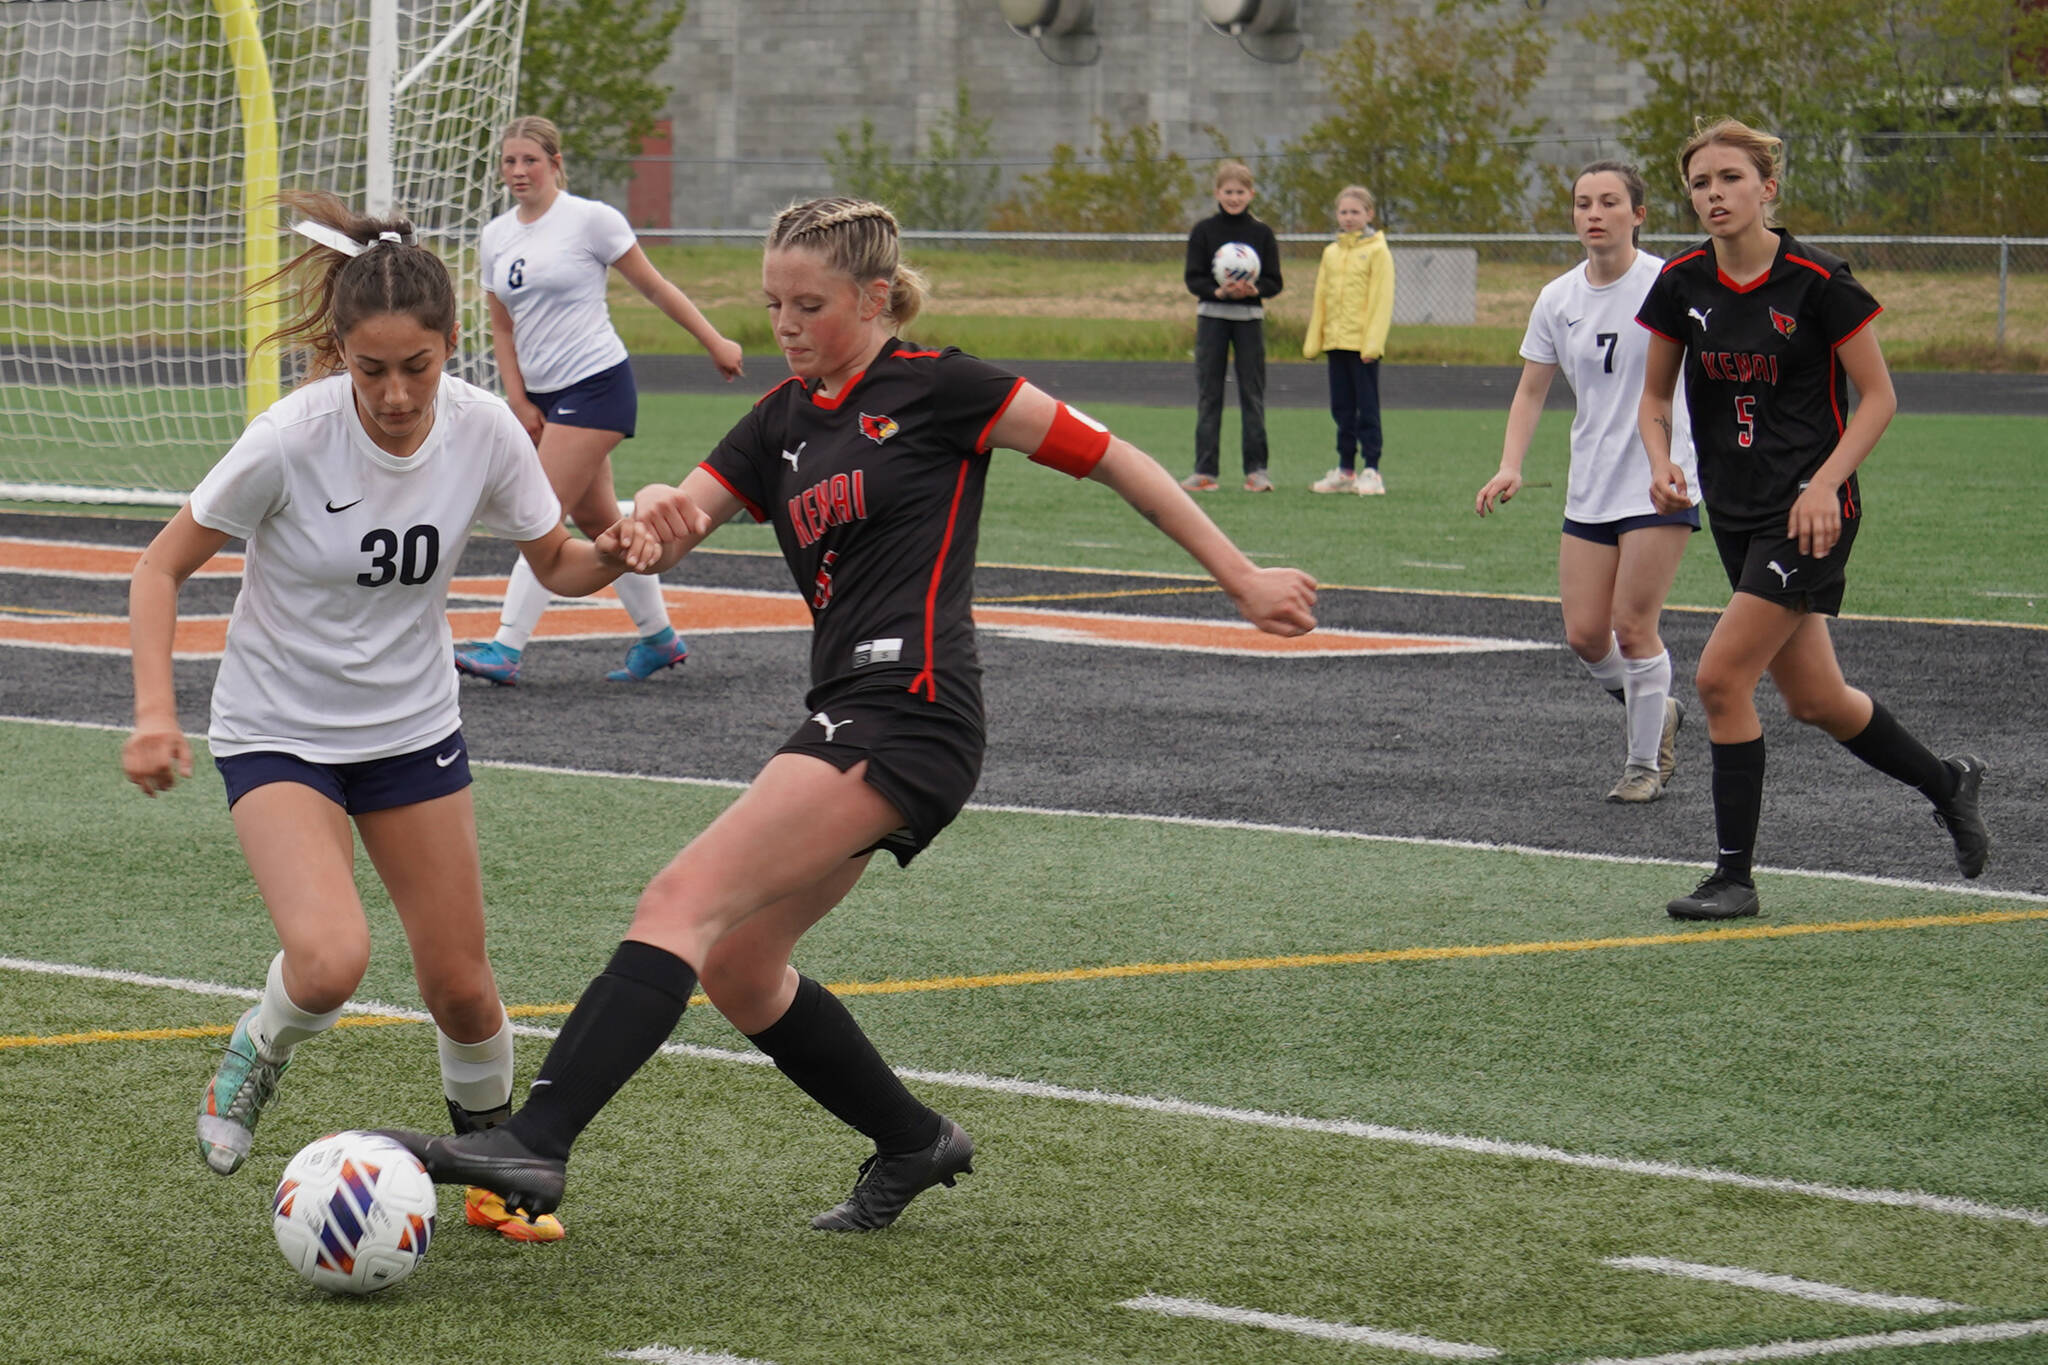 Soldotna’s Zayra Poage battles for the ball with Kenai Central’s Kori Moore during the Division II Soccer State Championship on Saturday, May 27, 2023, at West Anchorage High School in Anchorage, Alaska. (Jake Dye/Peninsula Clarion)